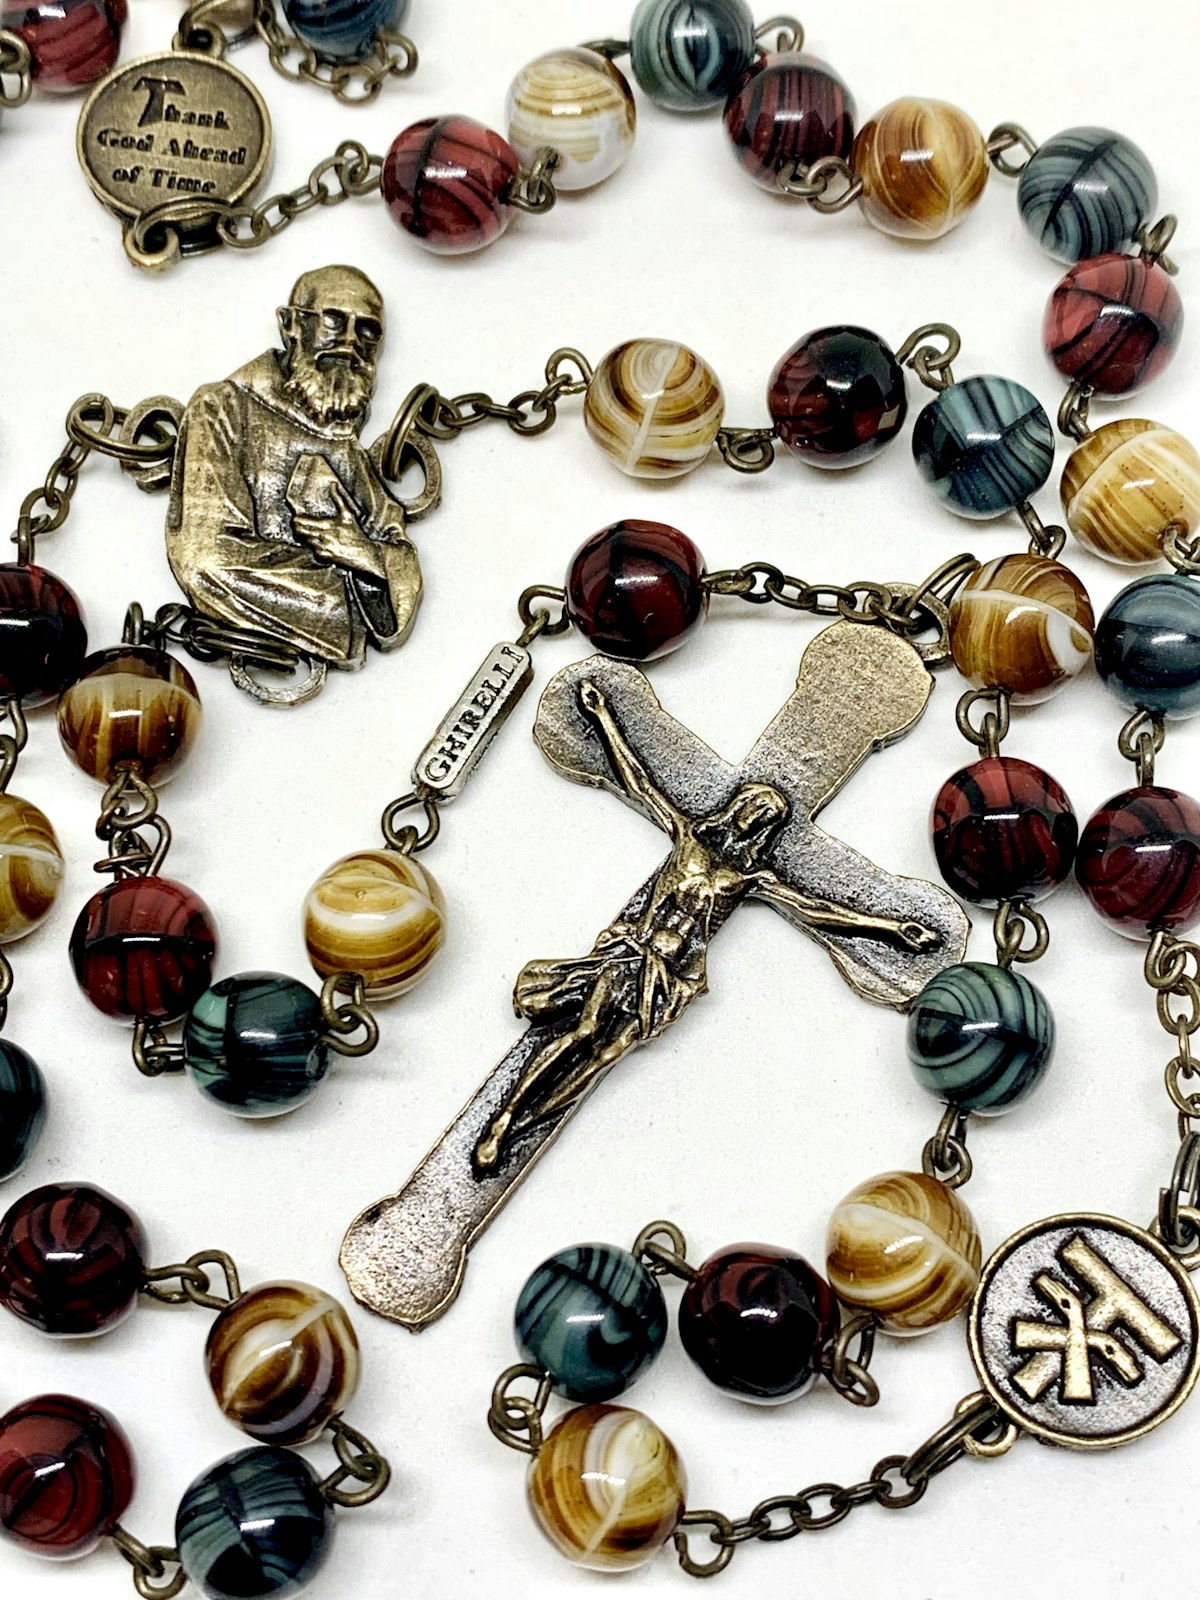 The Blessed Solanus Casey rosary includes beads that reflect the saintly friar's life, including the Tau cross and Blessed Solanus' well-known sayings, such as "Blessed be God in all His designs."